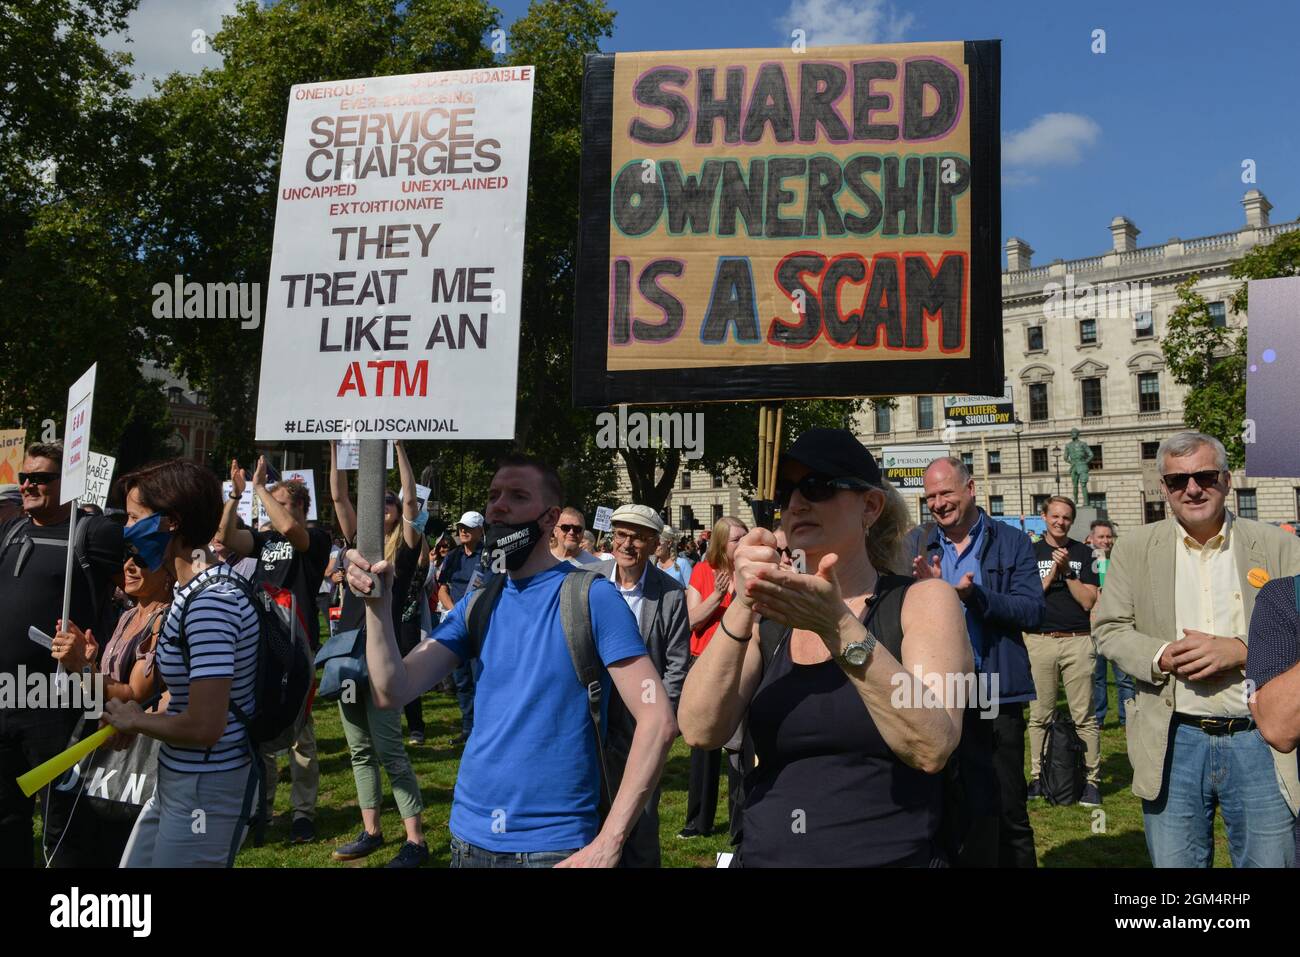 London, UK. 16th Sep, 2021. Protesters are seen holding placards at a Leaseholders Together Rally in Parliament Square, during the demonstration.The protest was organized by End Our Cladding Scandal campaign with the National Leasehold Campaign. People protested about restrictions to leasehold rights and cladding crisis issues. Credit: SOPA Images Limited/Alamy Live News Stock Photo